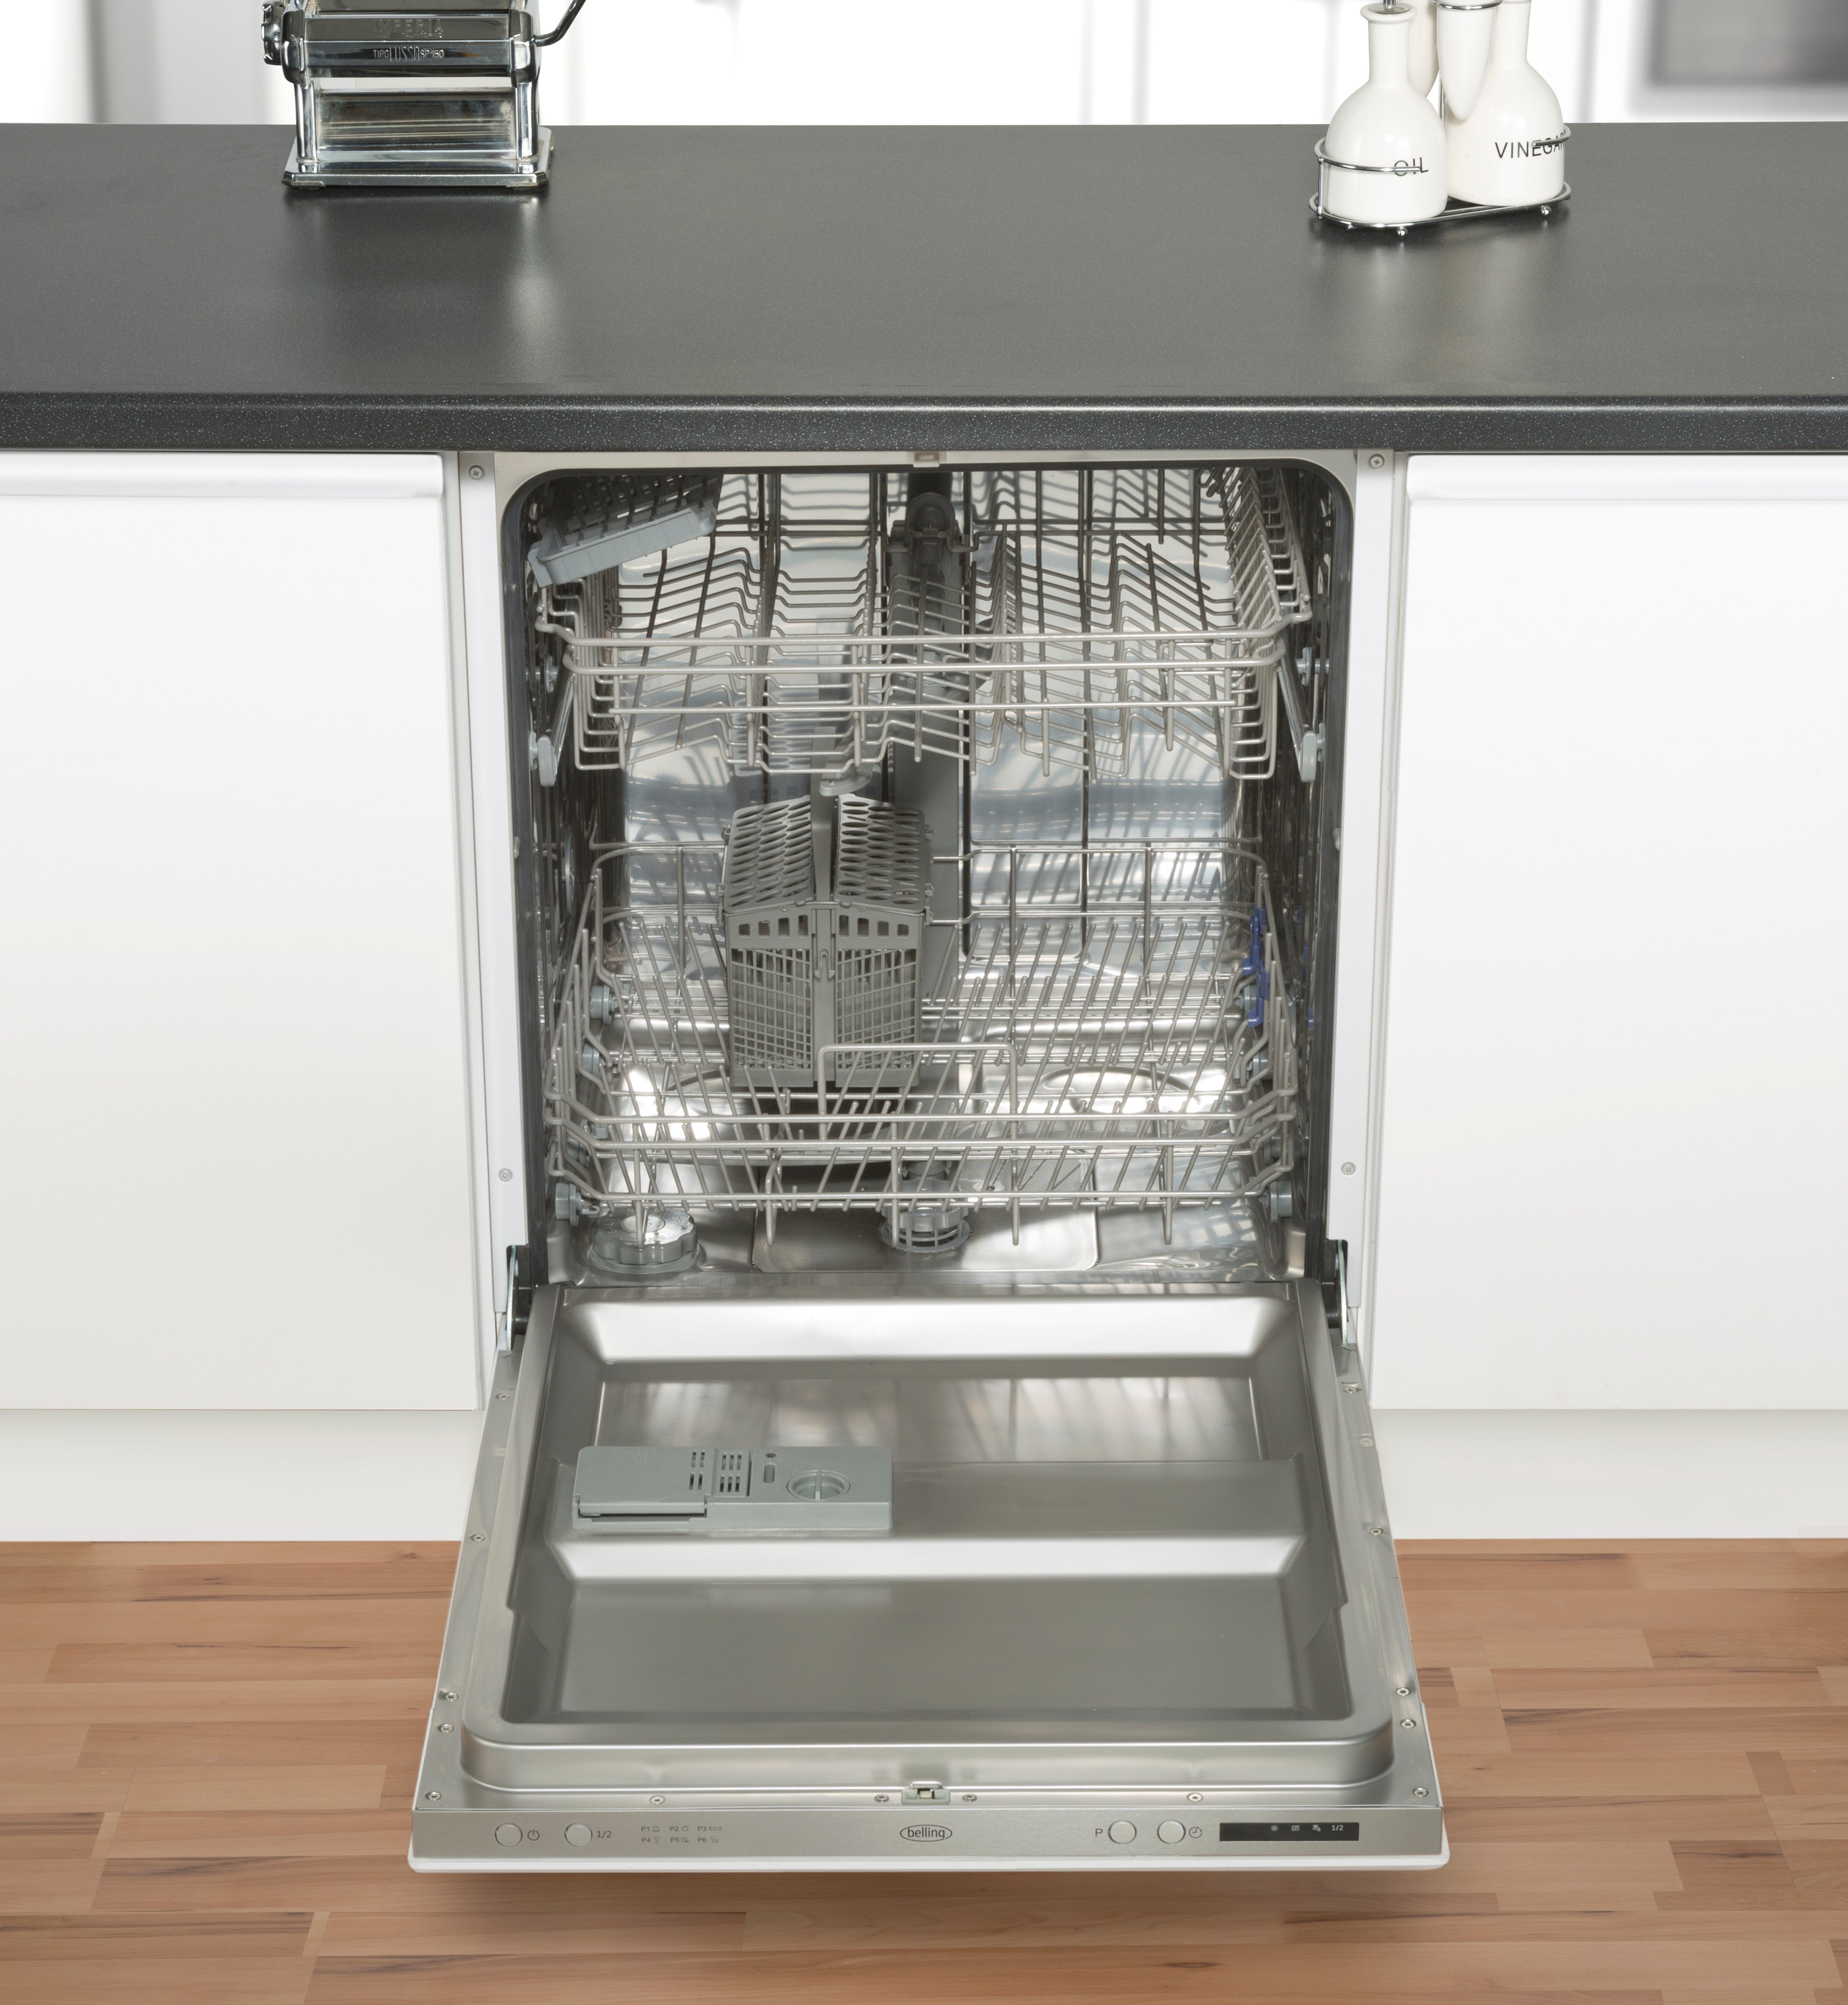 60cm 14 place setting integrated dishwasher features Delay Timer, Overflow Protection, adjustable upper basket and removable cutlery basket.  